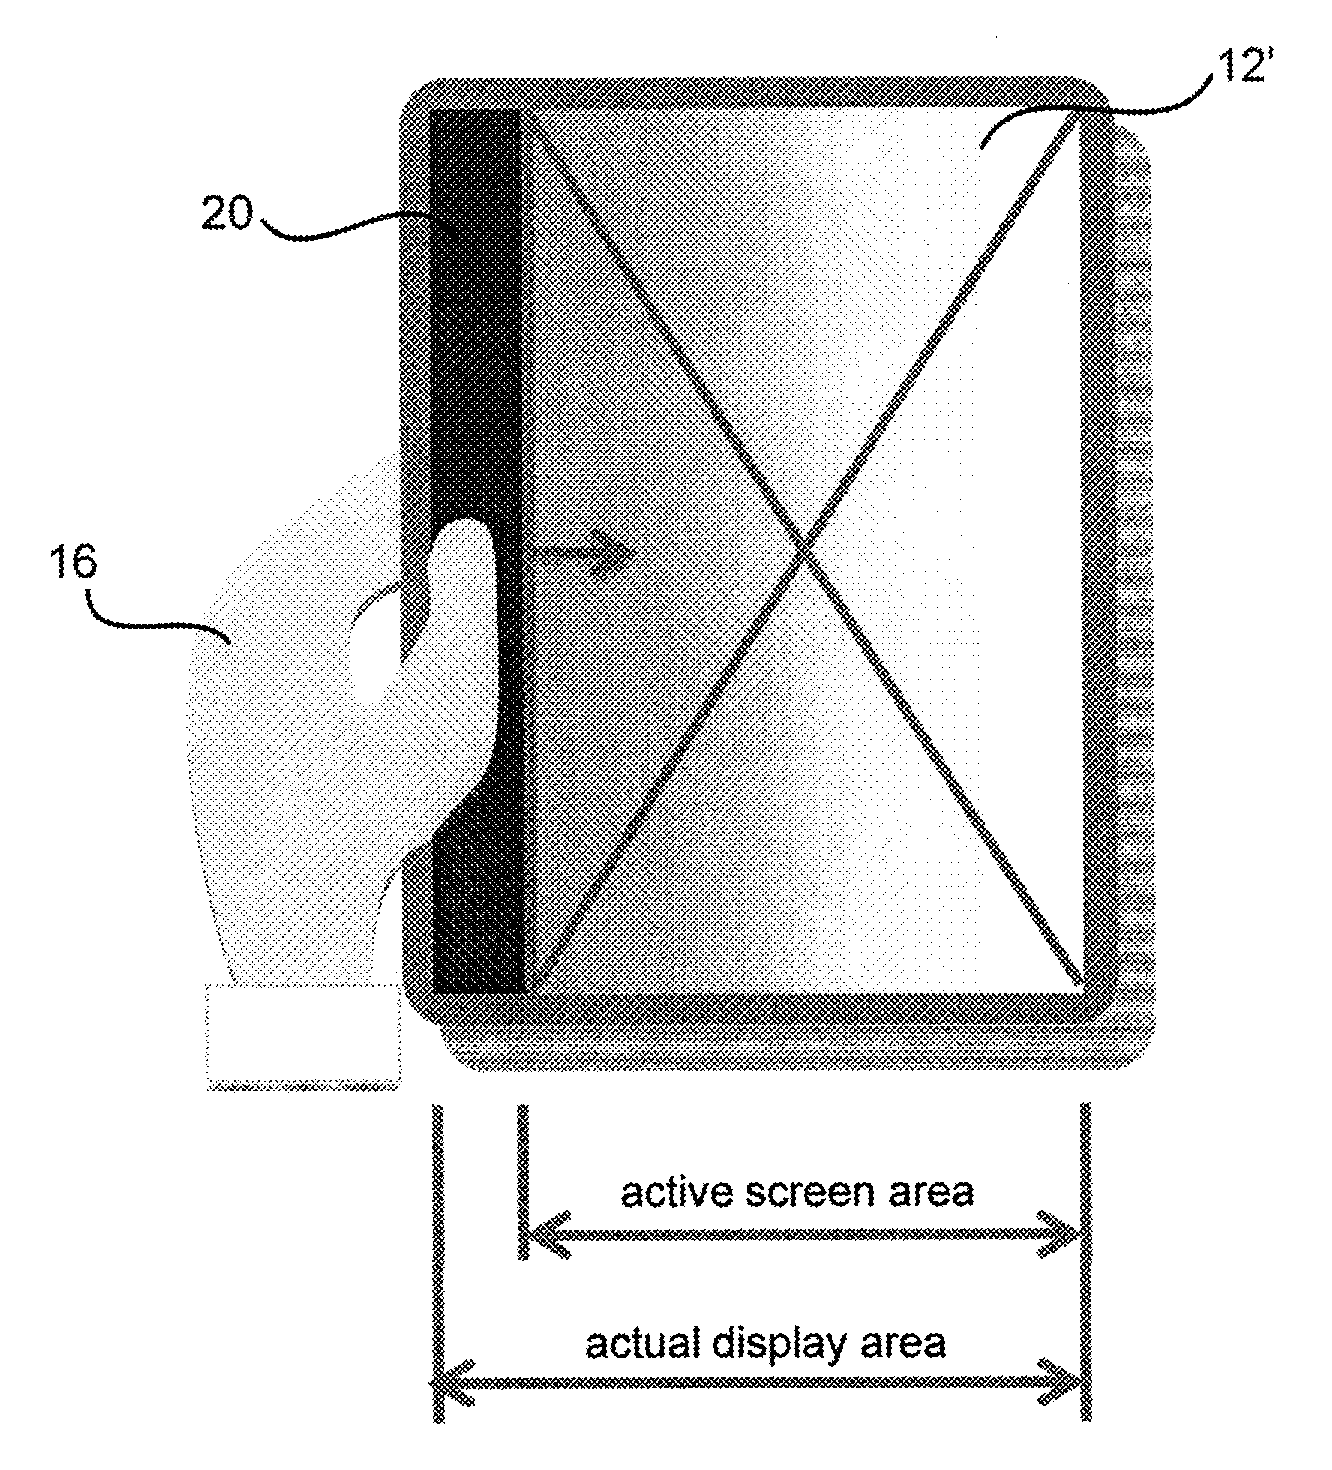 System and Method for Dynamically Resizing an Active Screen of a Handheld Device